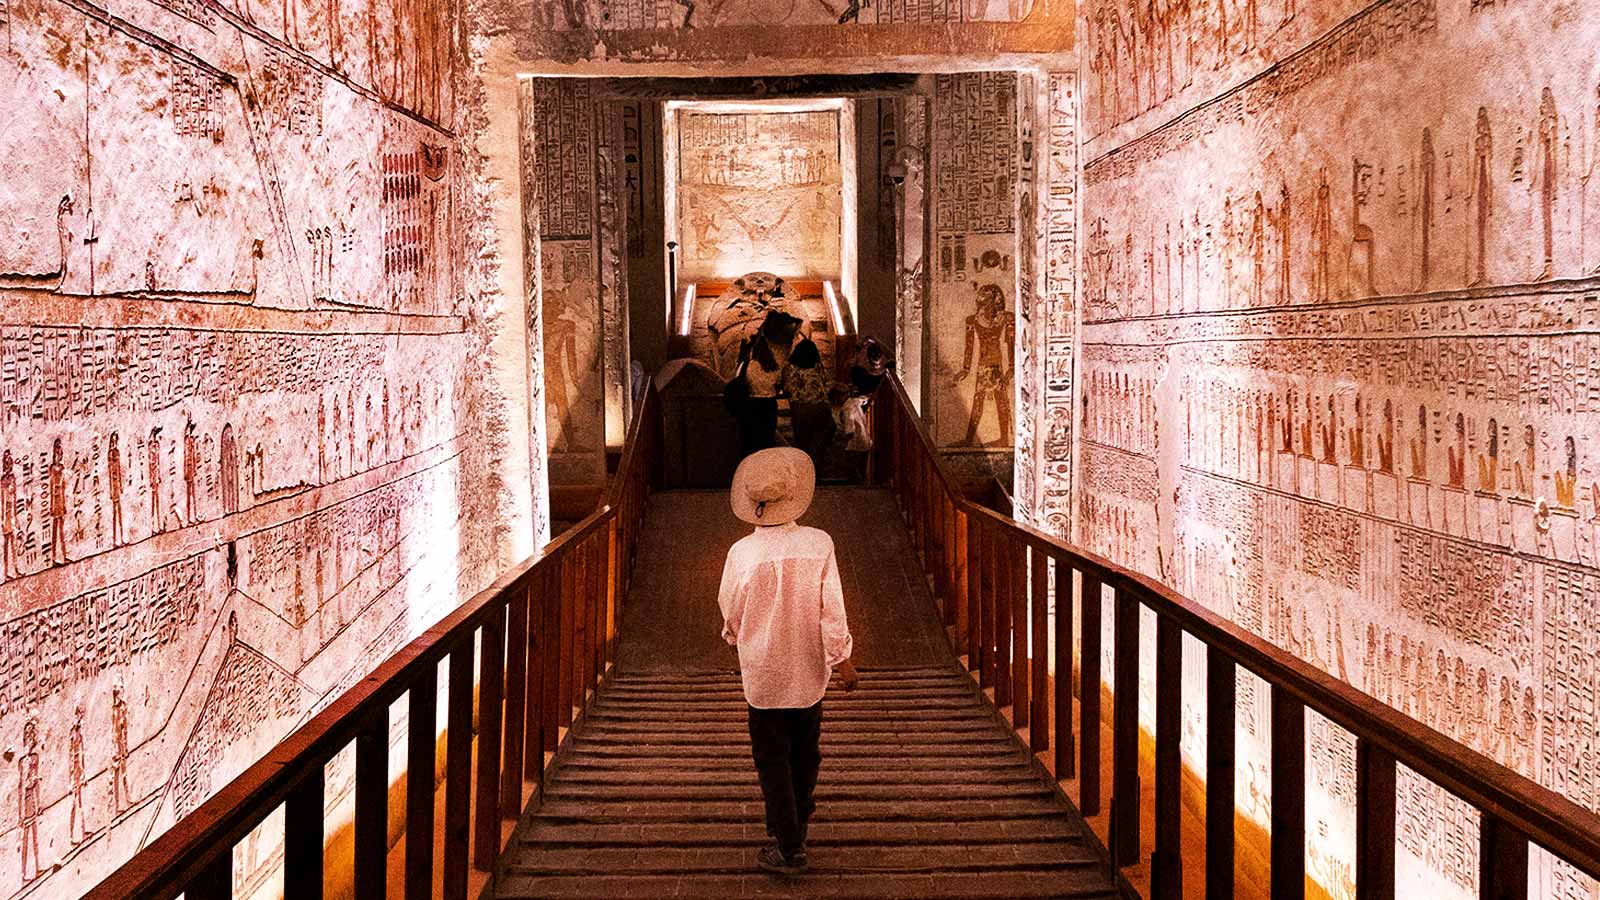 Things to do in Luxor Egypt